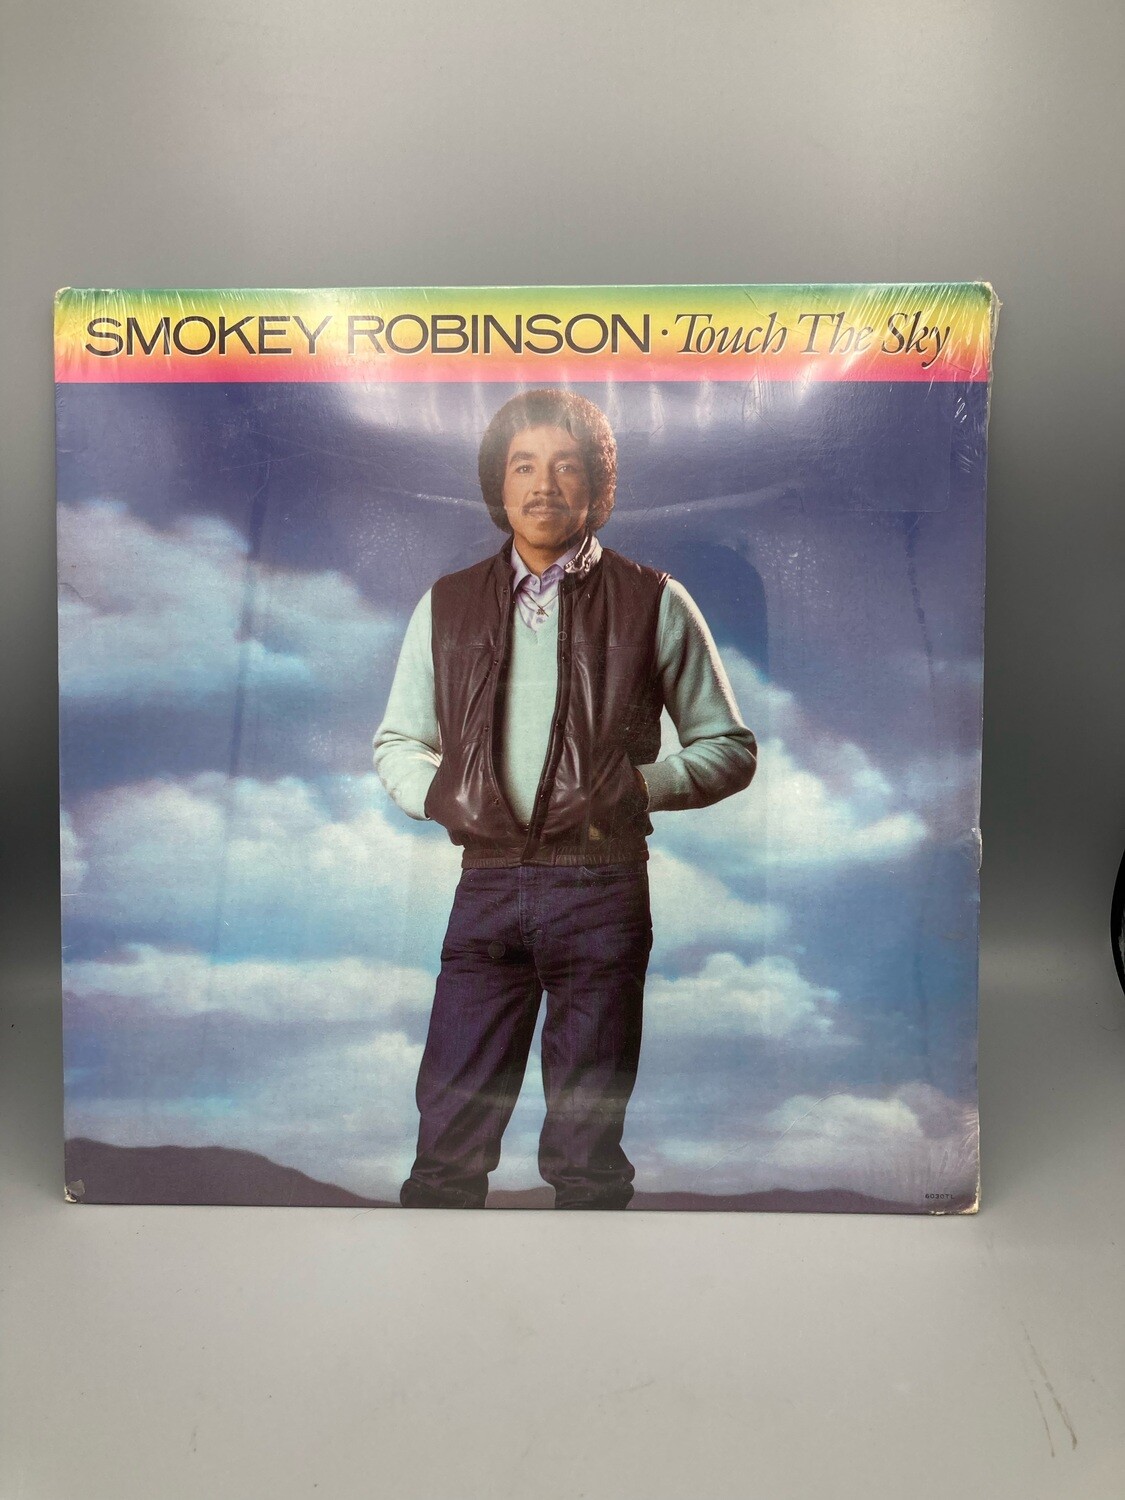 Smokey Robinson Touch the Sky new